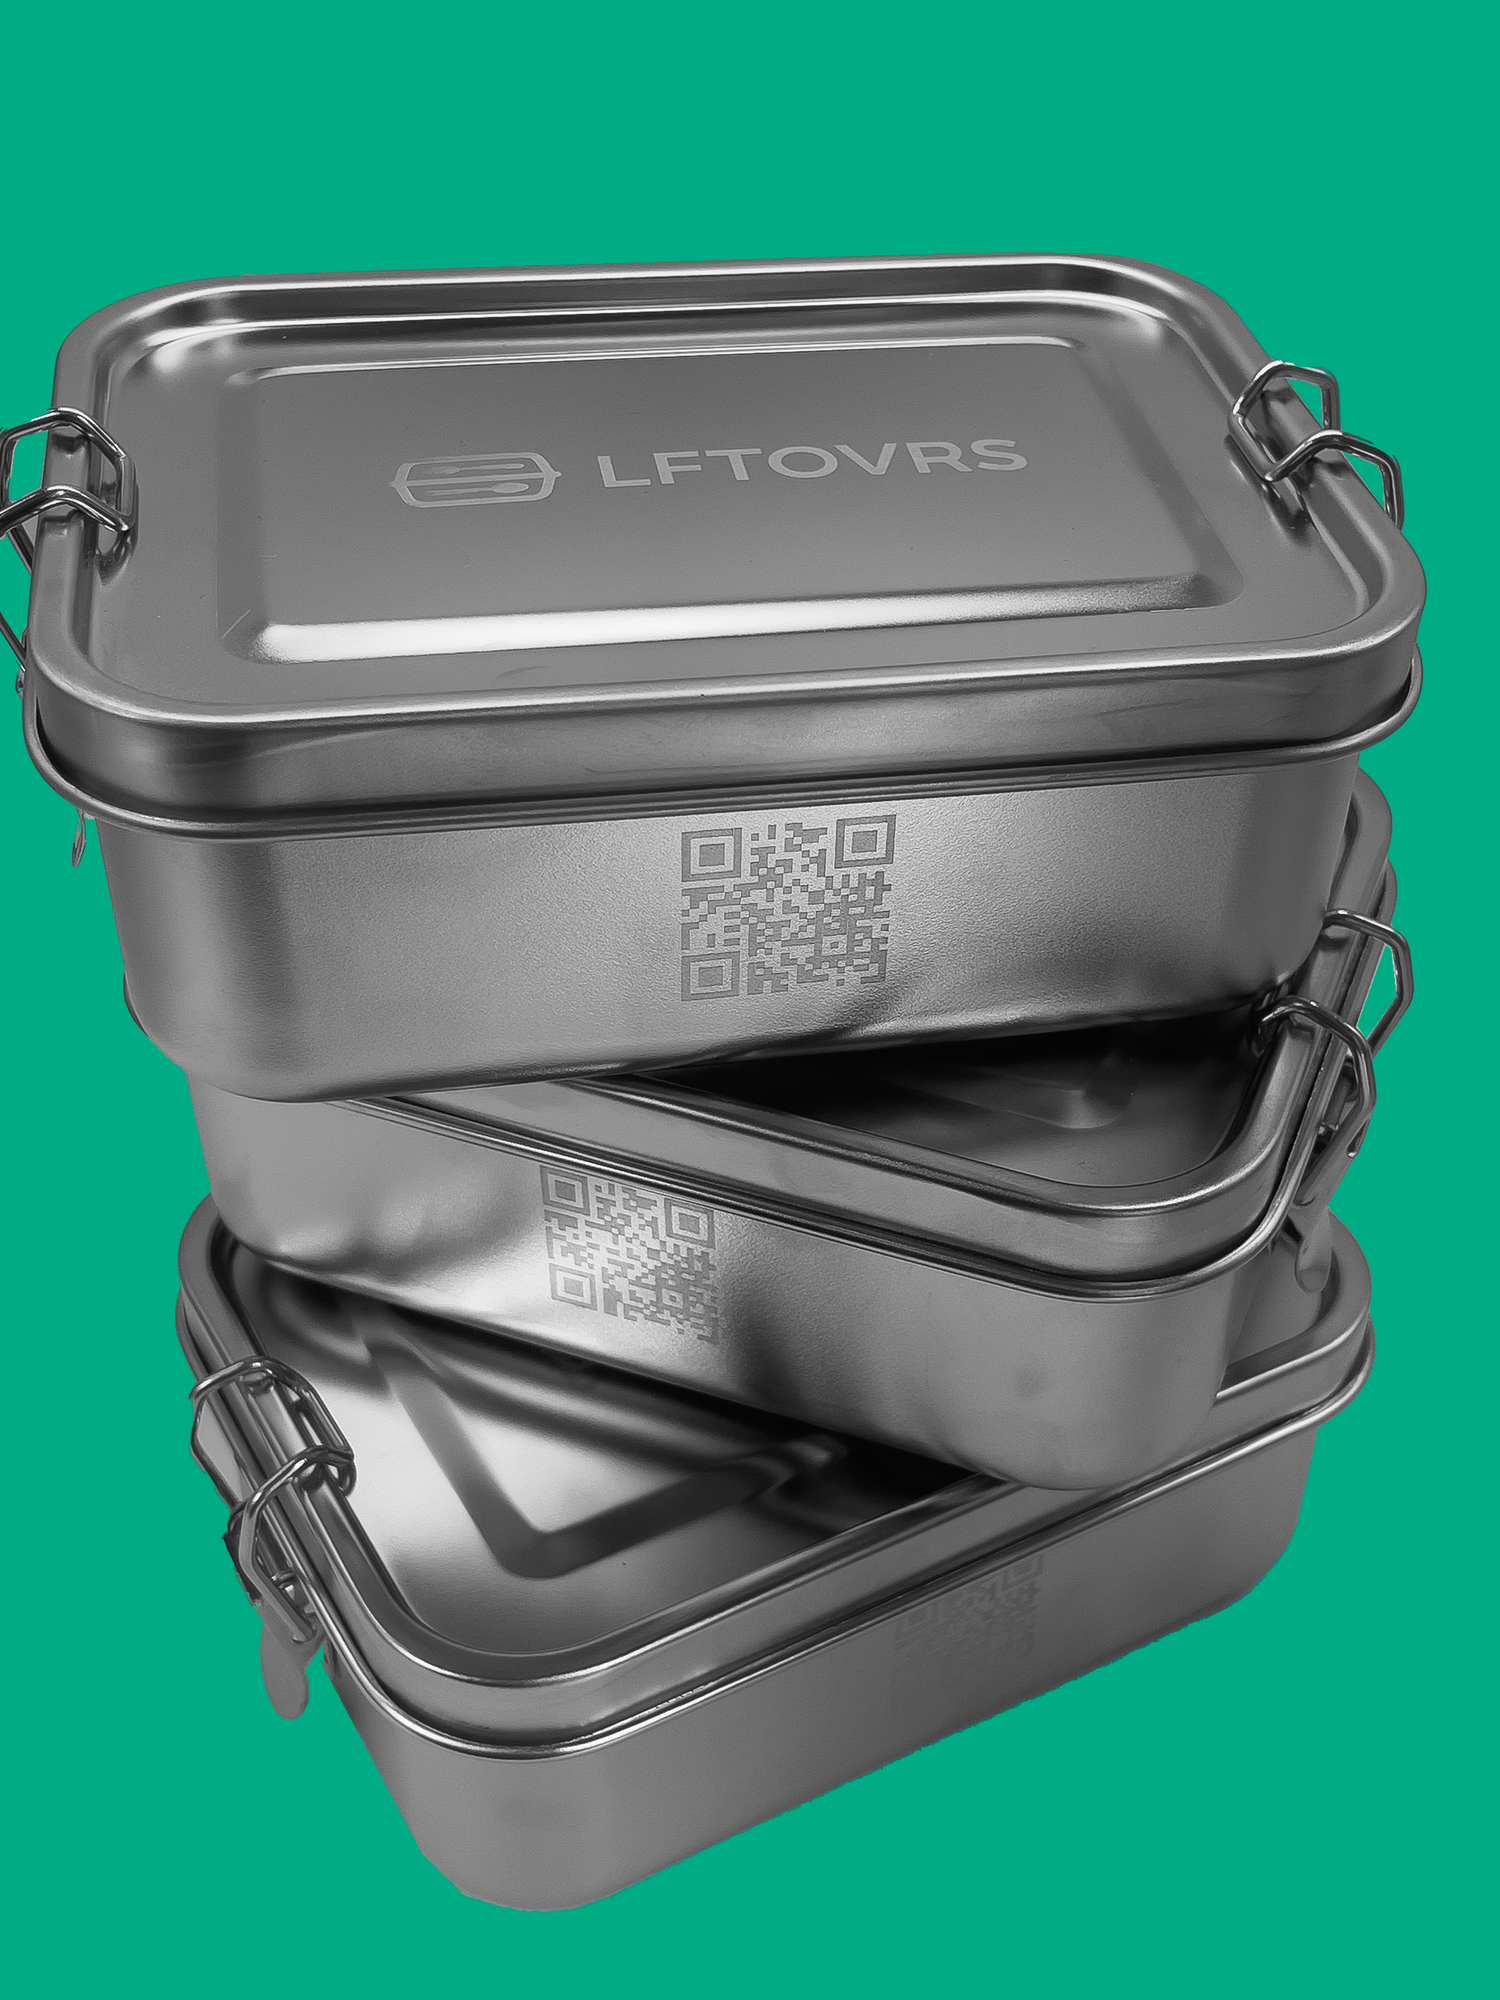 App enabled meal prep containers